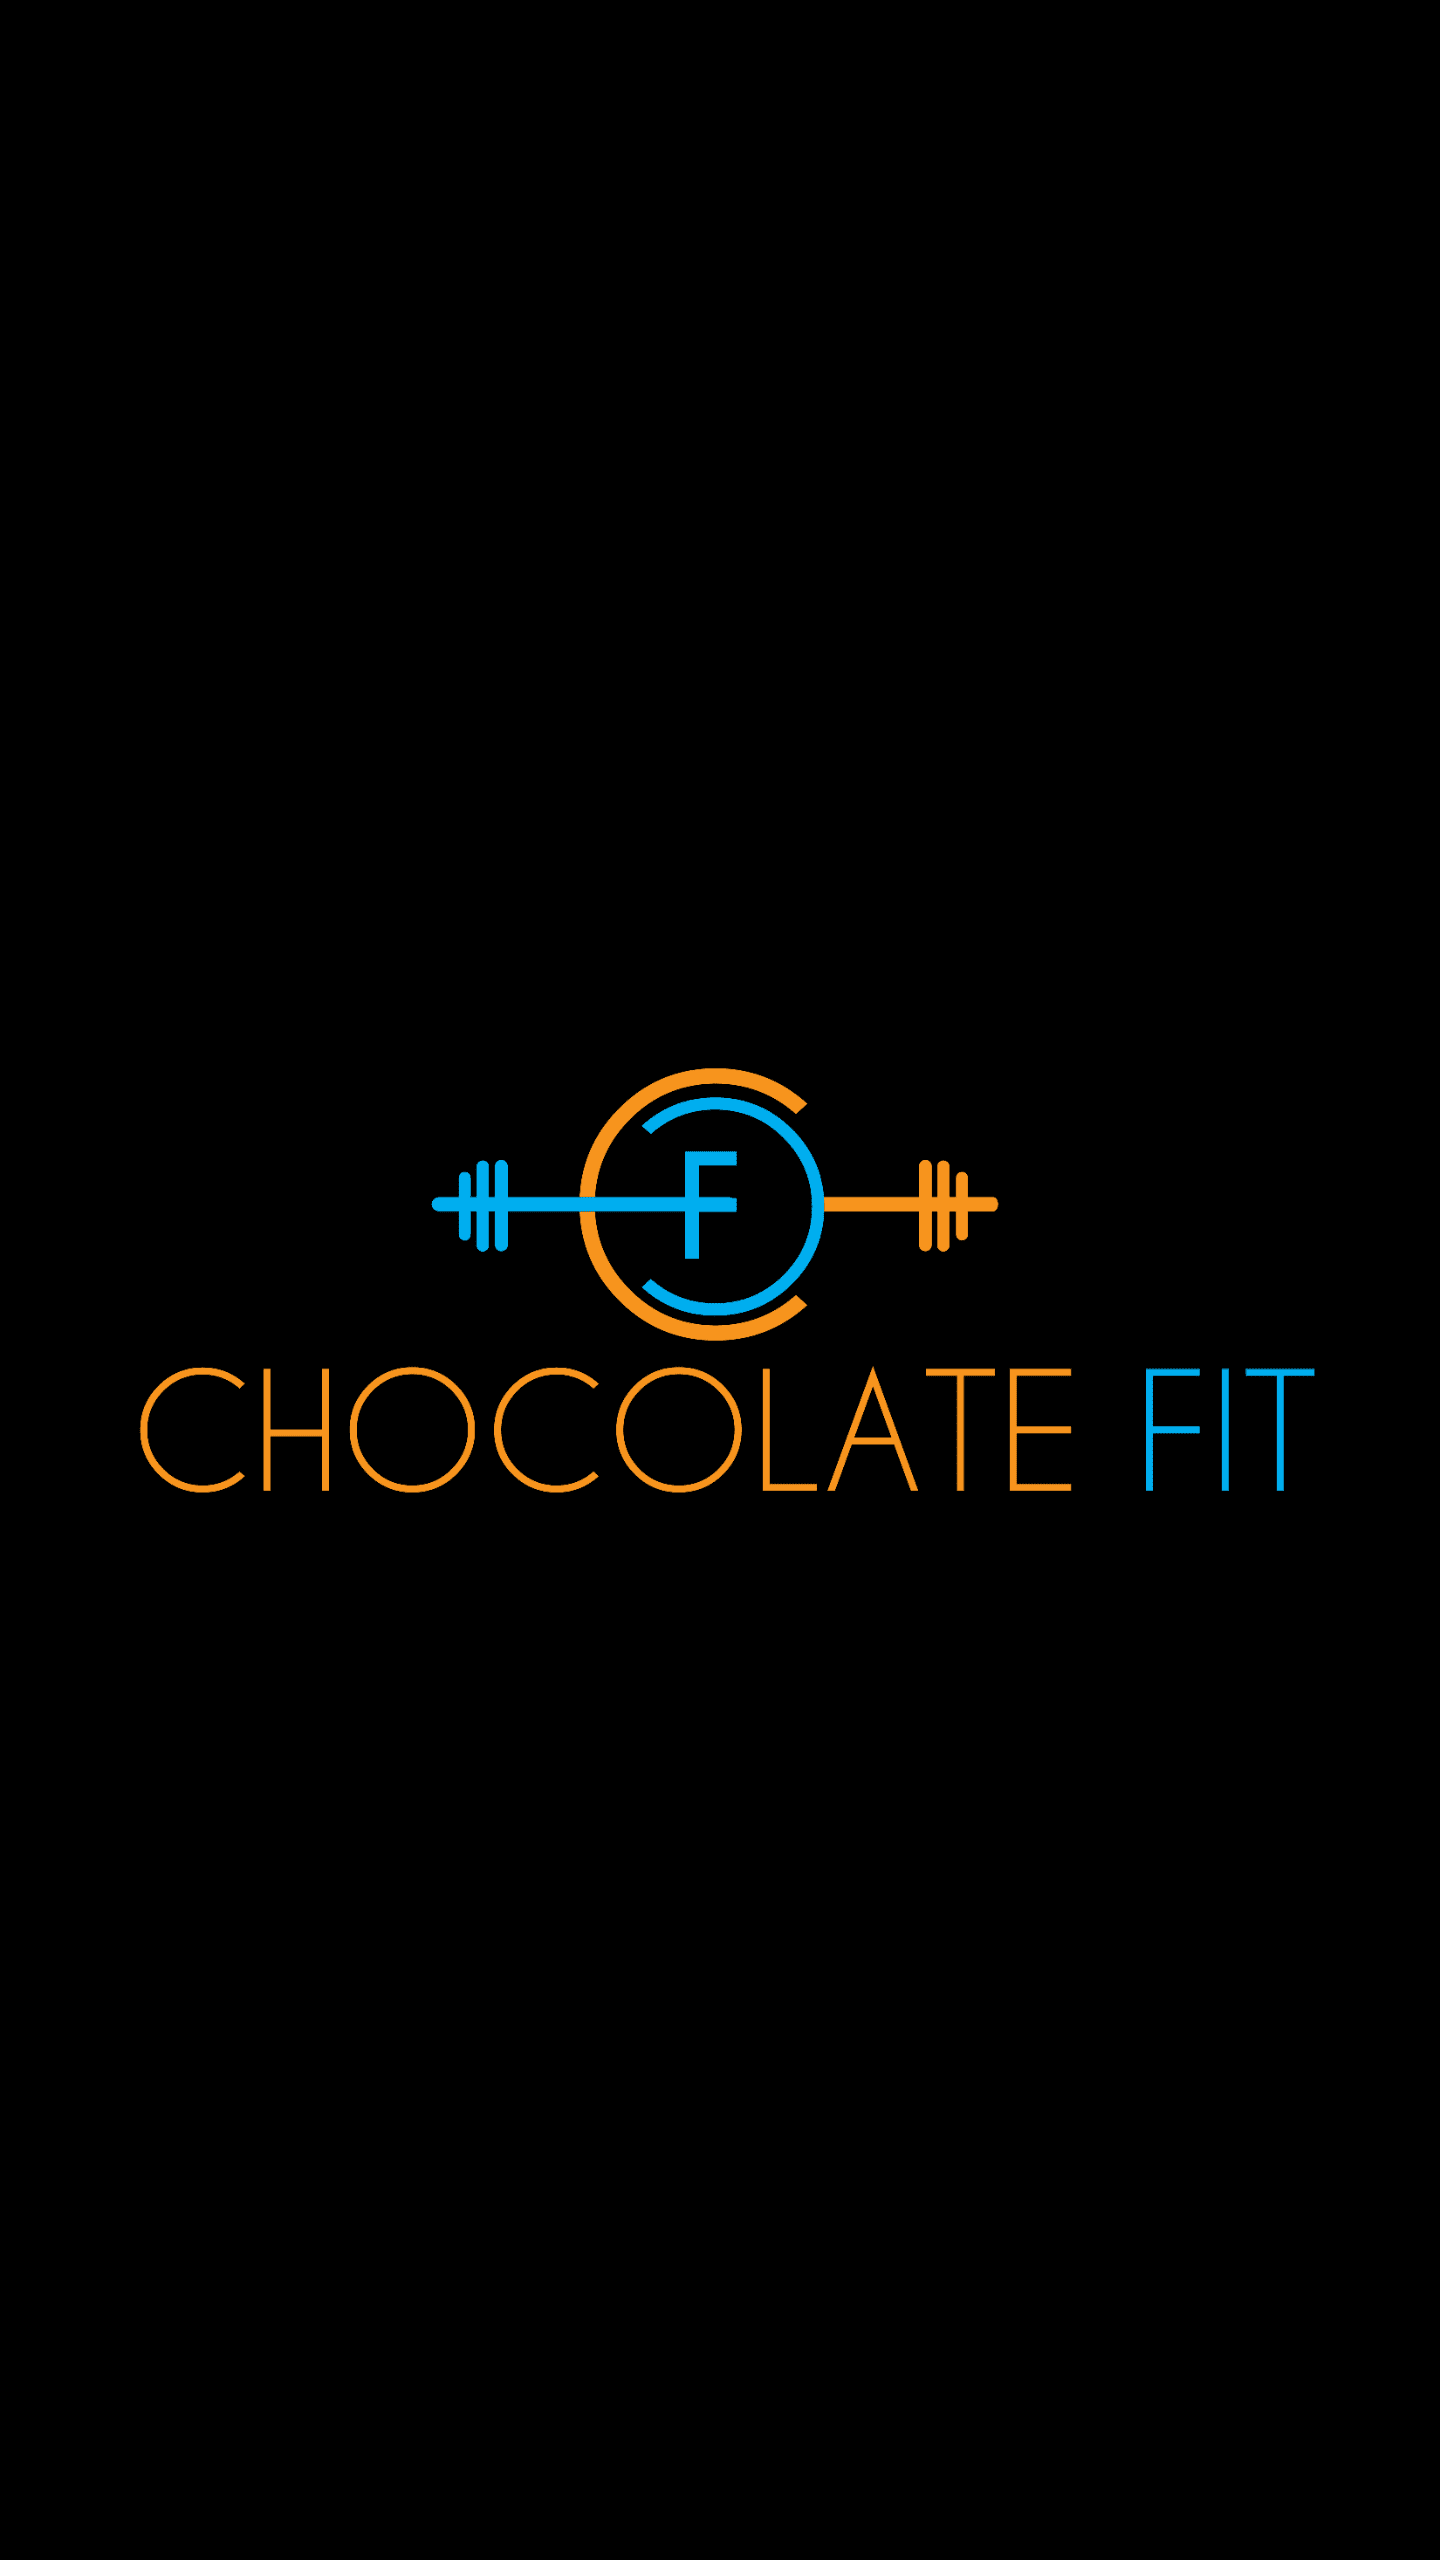 Chocolate Fit